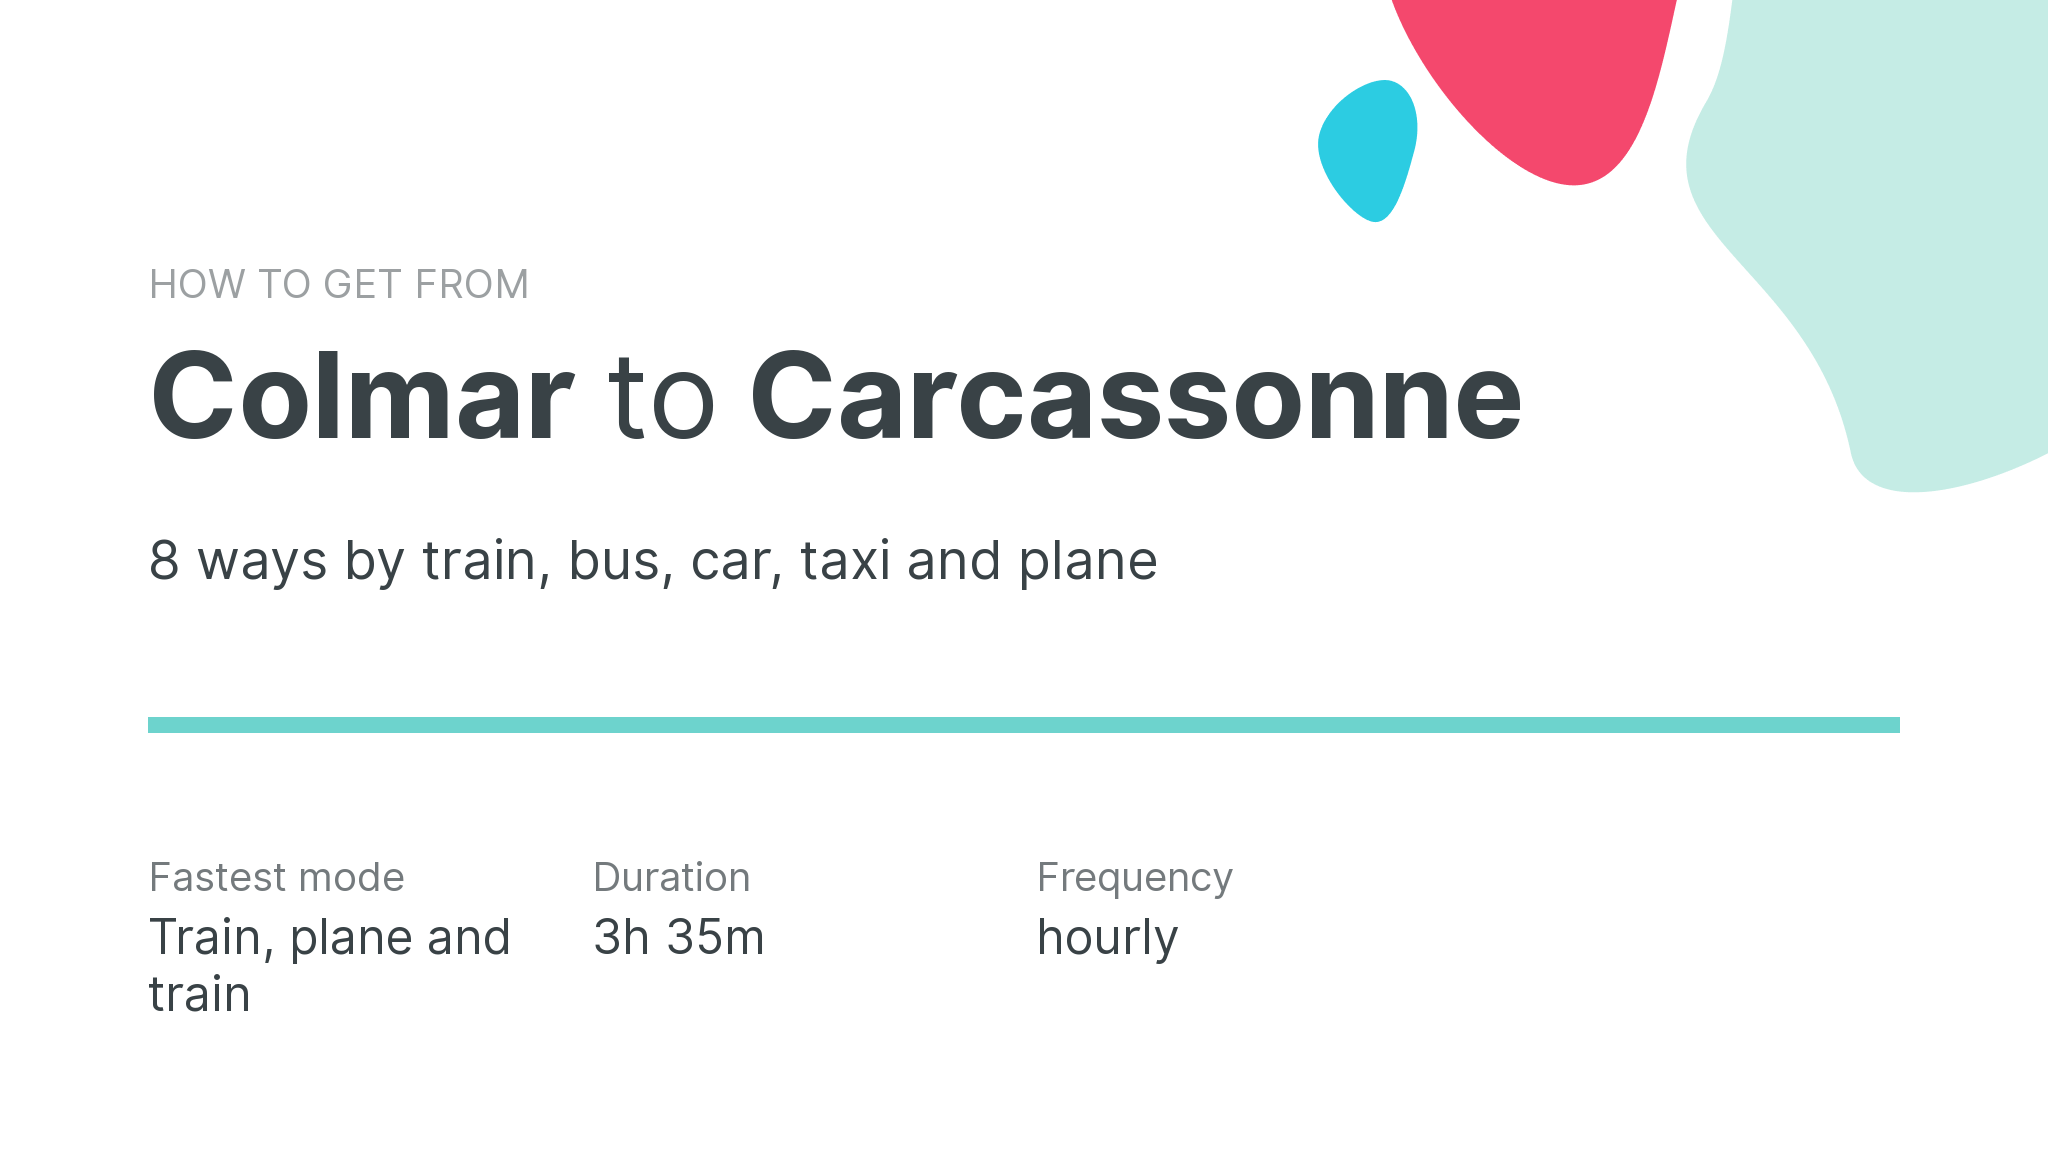 How do I get from Colmar to Carcassonne